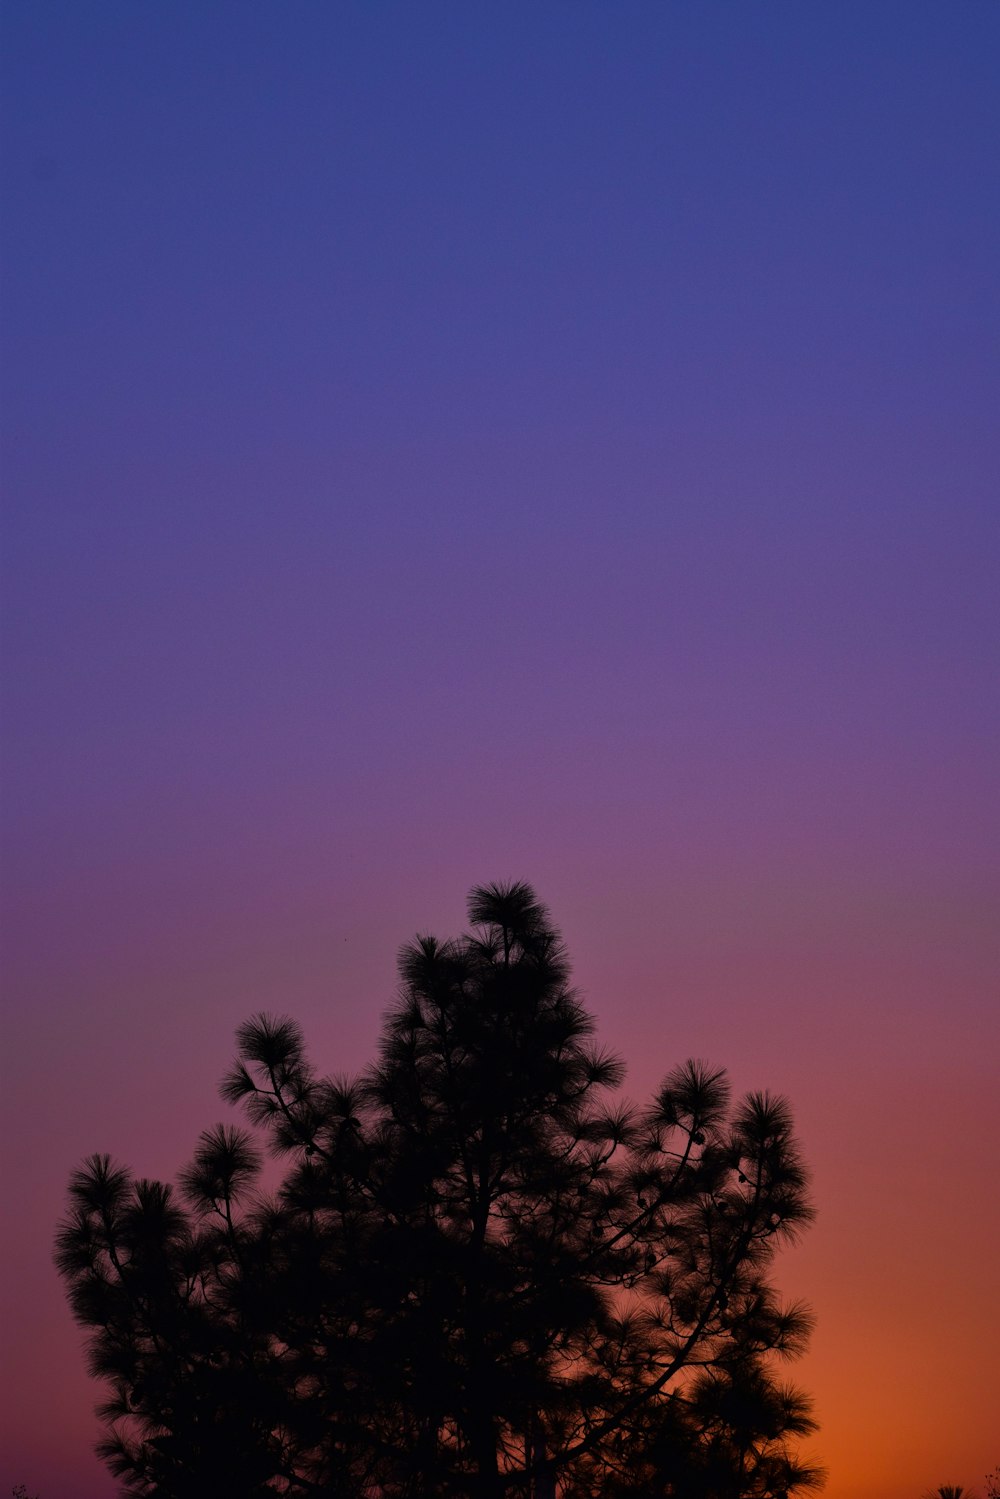 a tree is silhouetted against a purple and blue sky